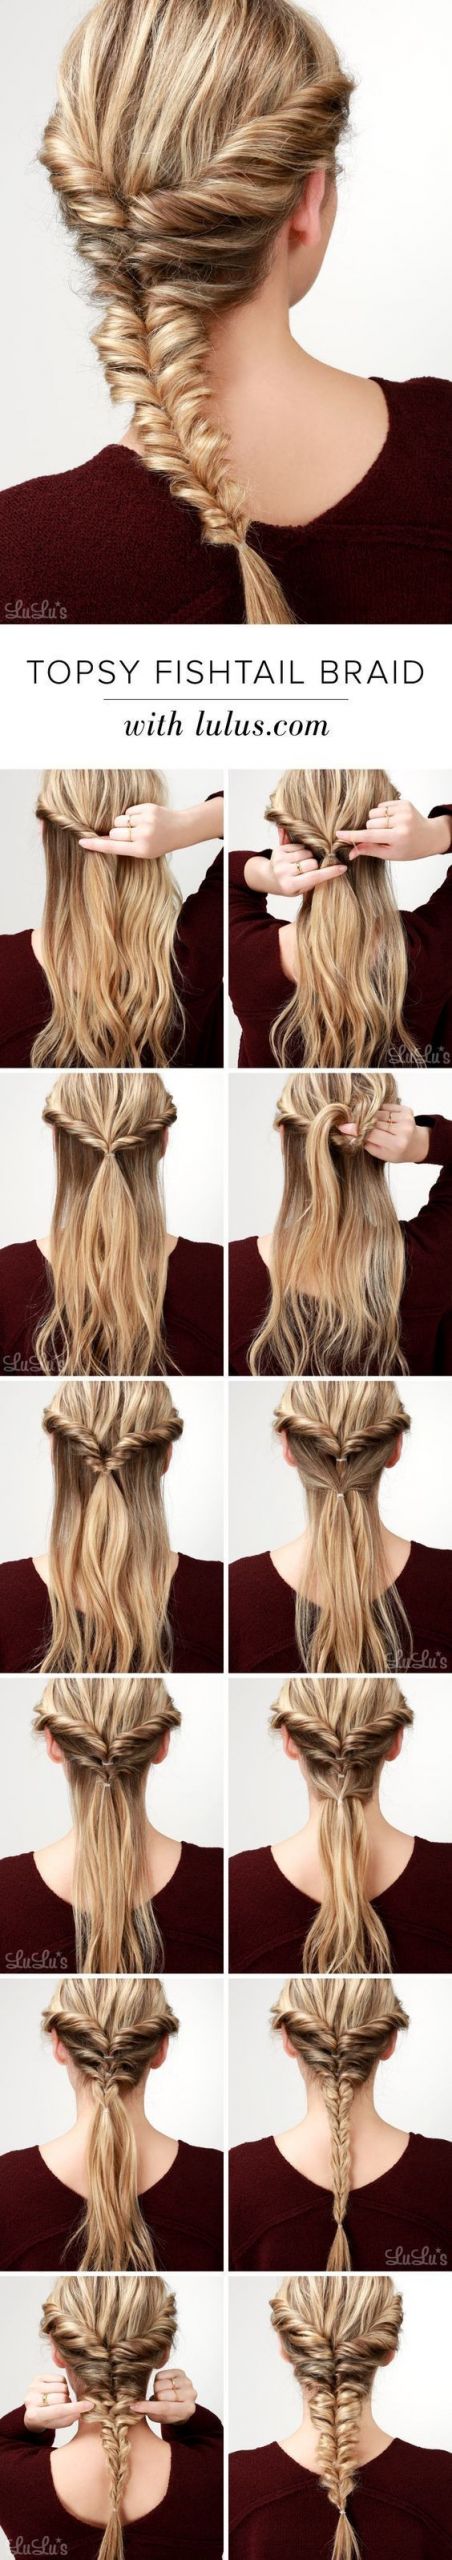 How To Make Cool Hairstyle
 10 Cute Braided Hairstyle Ideas Stylish Long Hairstyles 2020